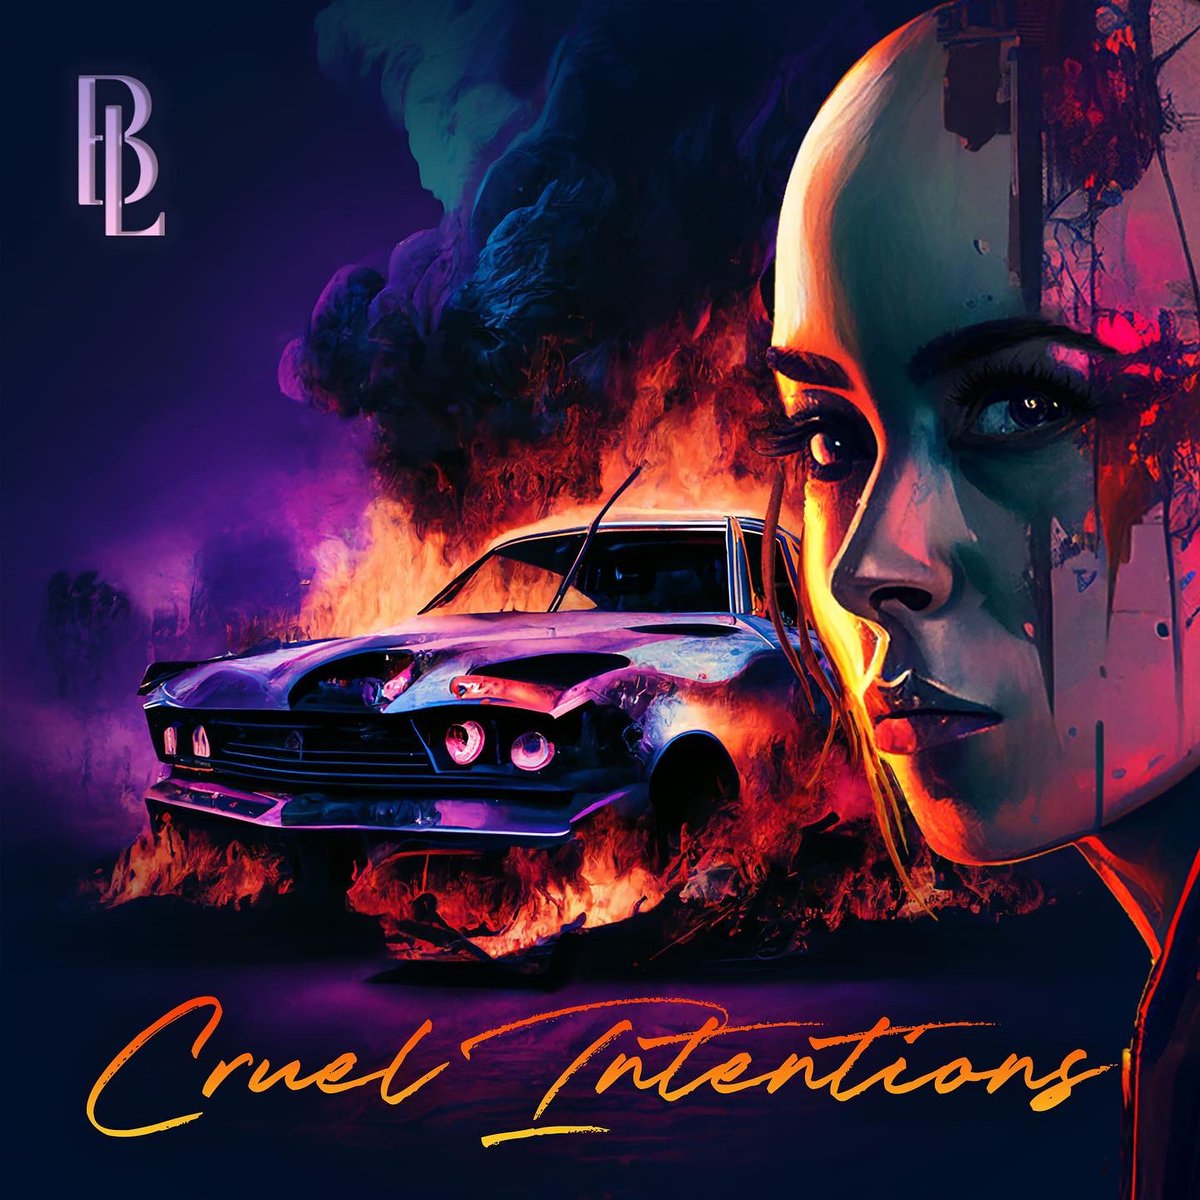 “CRUEL INTENTIONS” is finally here! 🔥❤️‍🔥🚀 vibe.to/cruelintentions Add it to your playlists and share it with the homies! #melodictechno #electronicmusic #happyreleaseday #newmusic #newmusicfriday